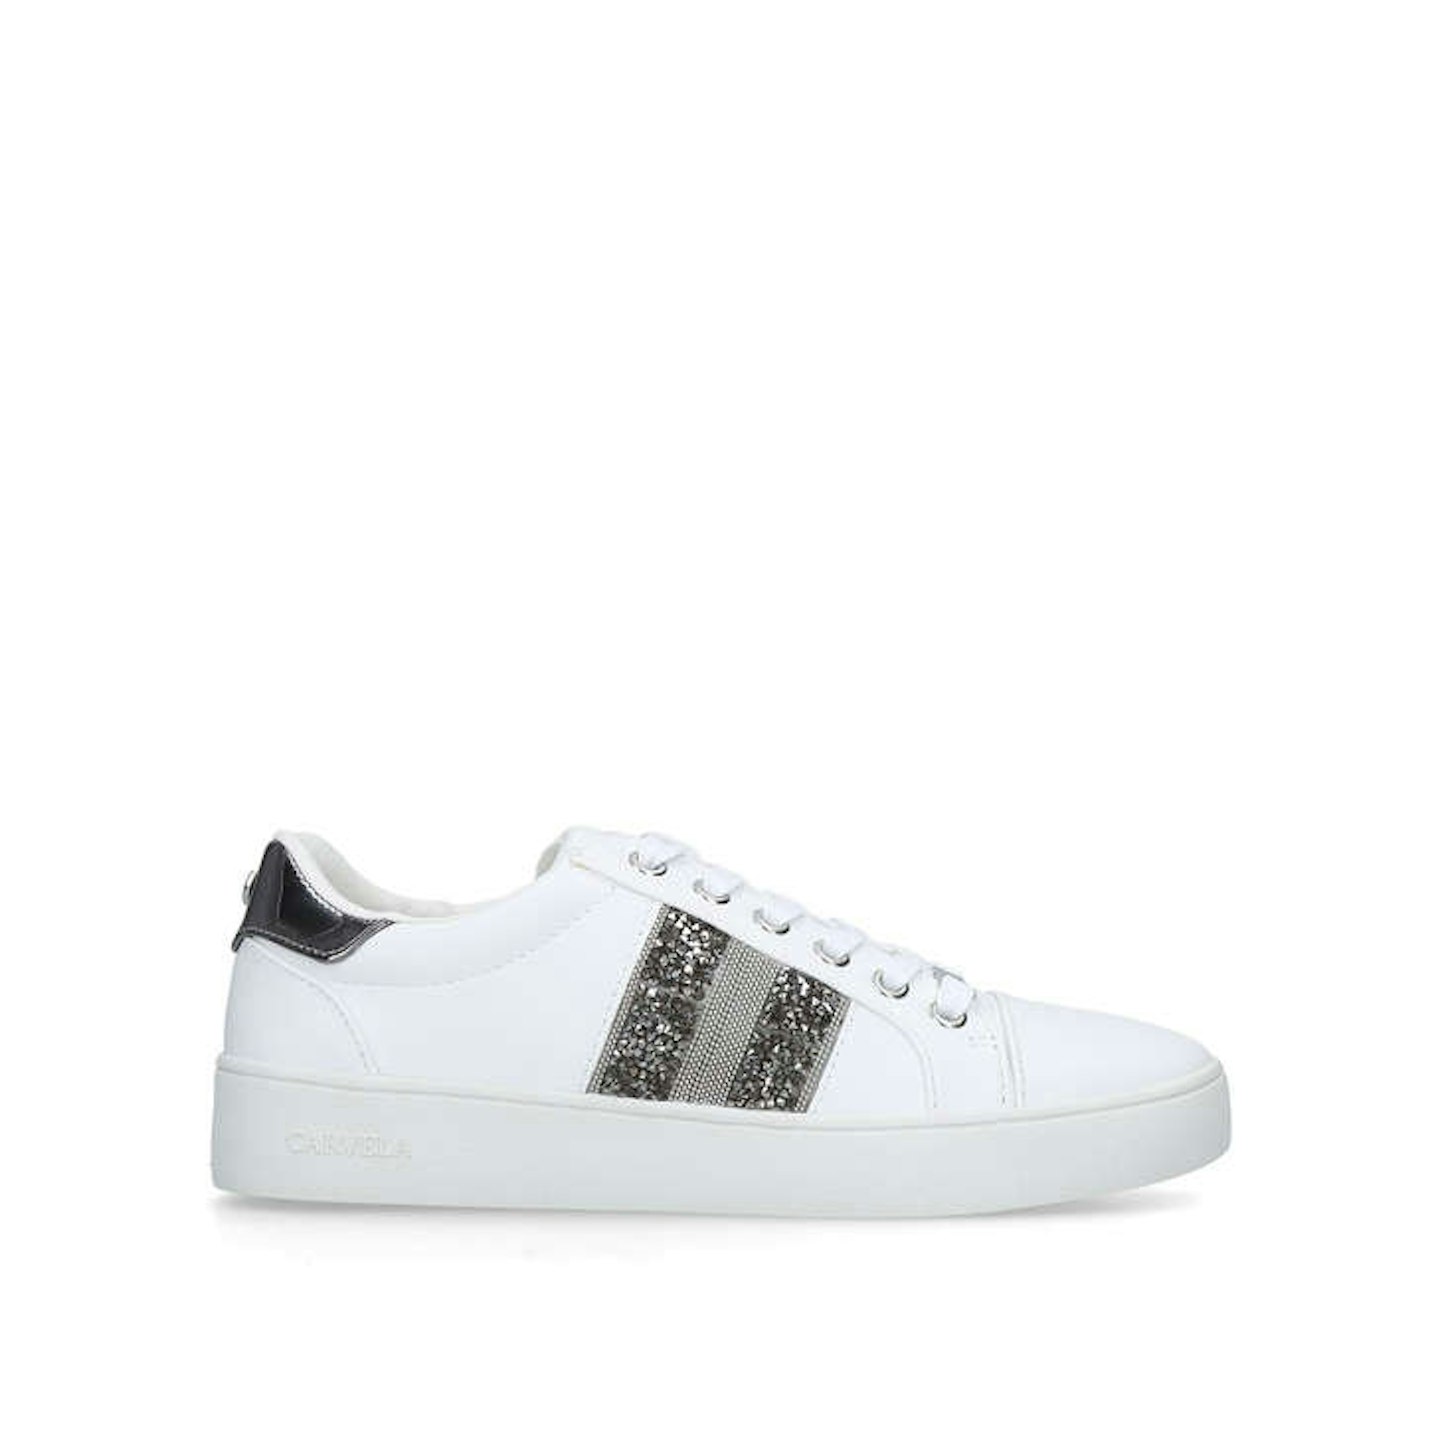 White Embellished Trainers, £99